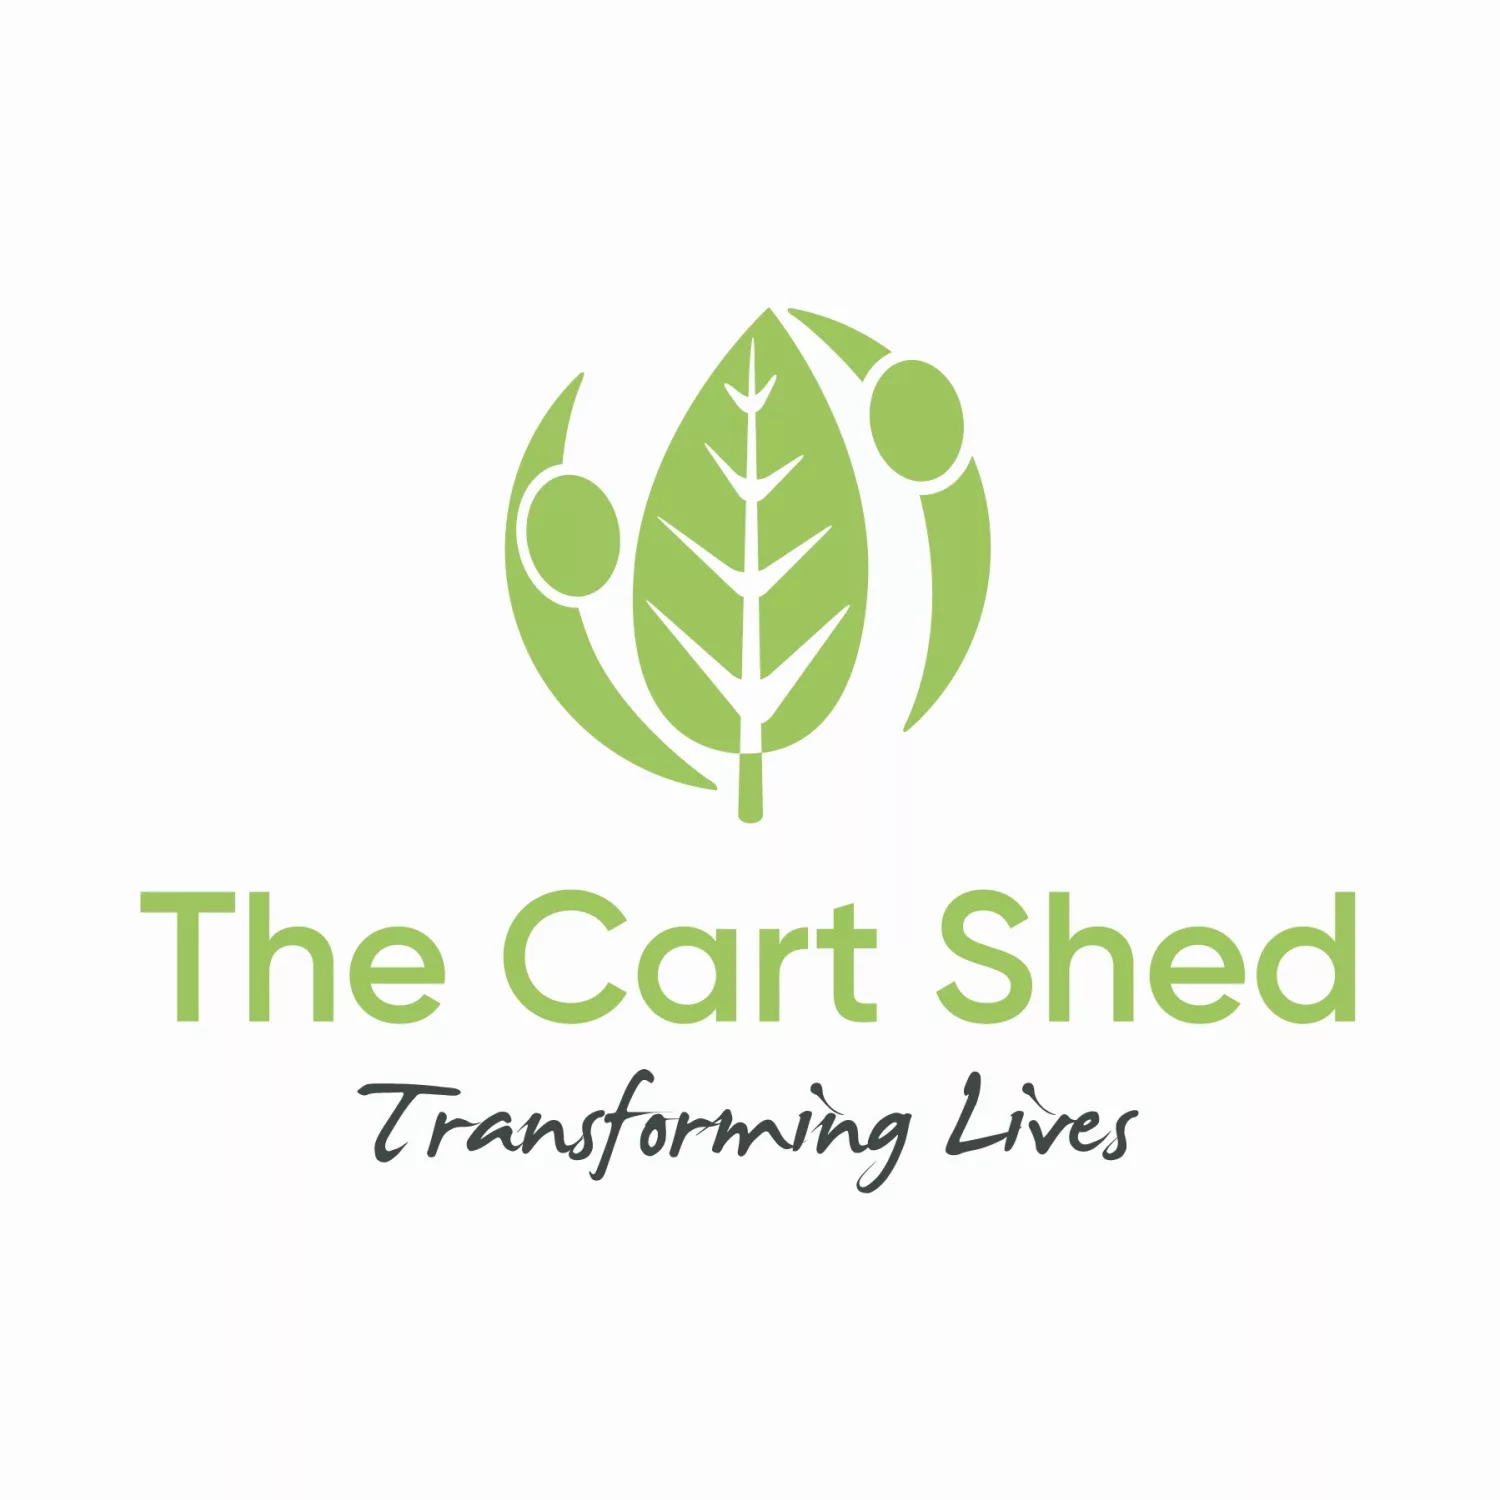 The Cart Shed charity logo with the tag line transforming lives